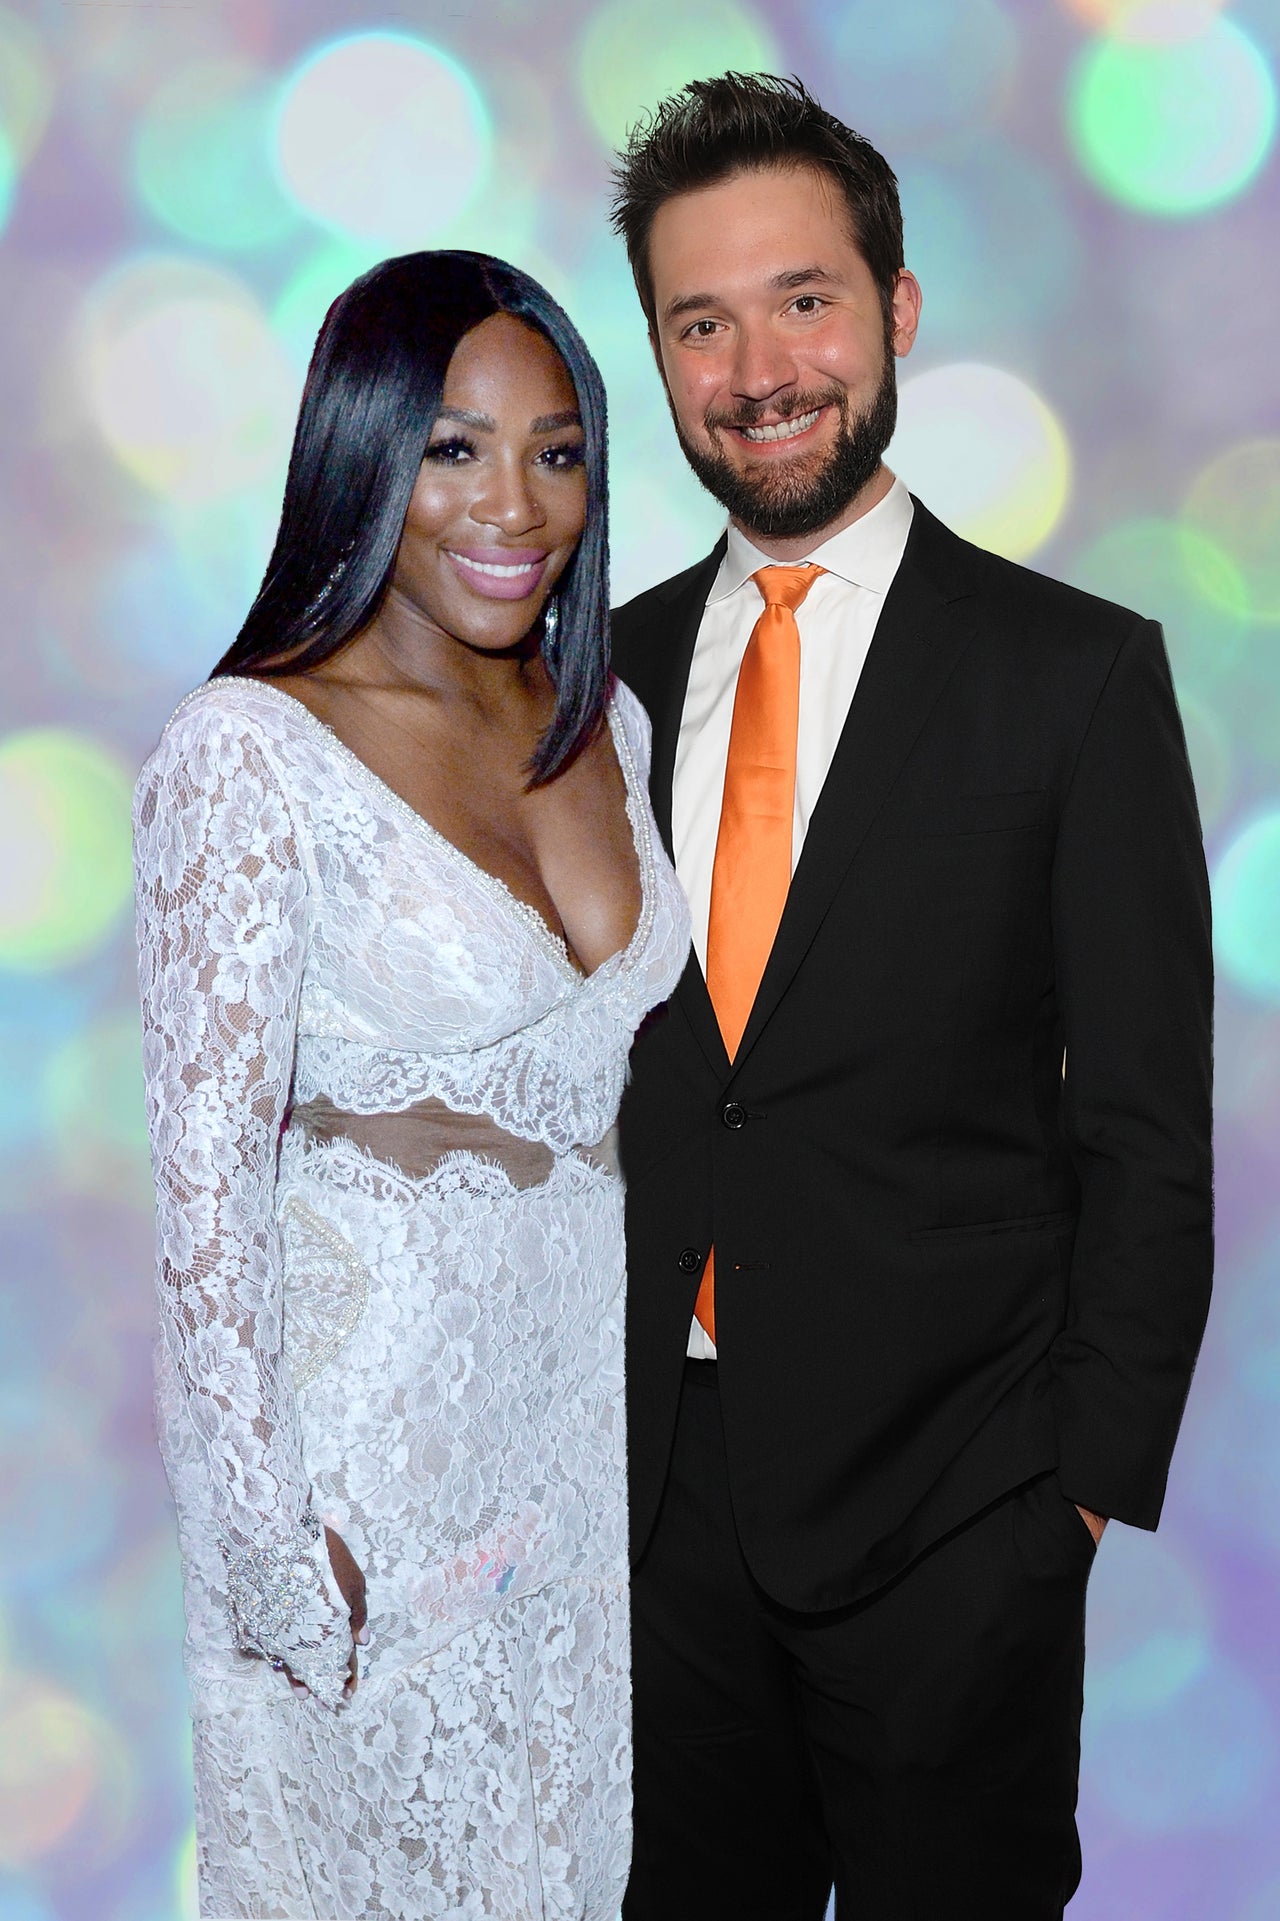 Serena Williams On Finding Love In An Unexpected Place: 'I Never ...